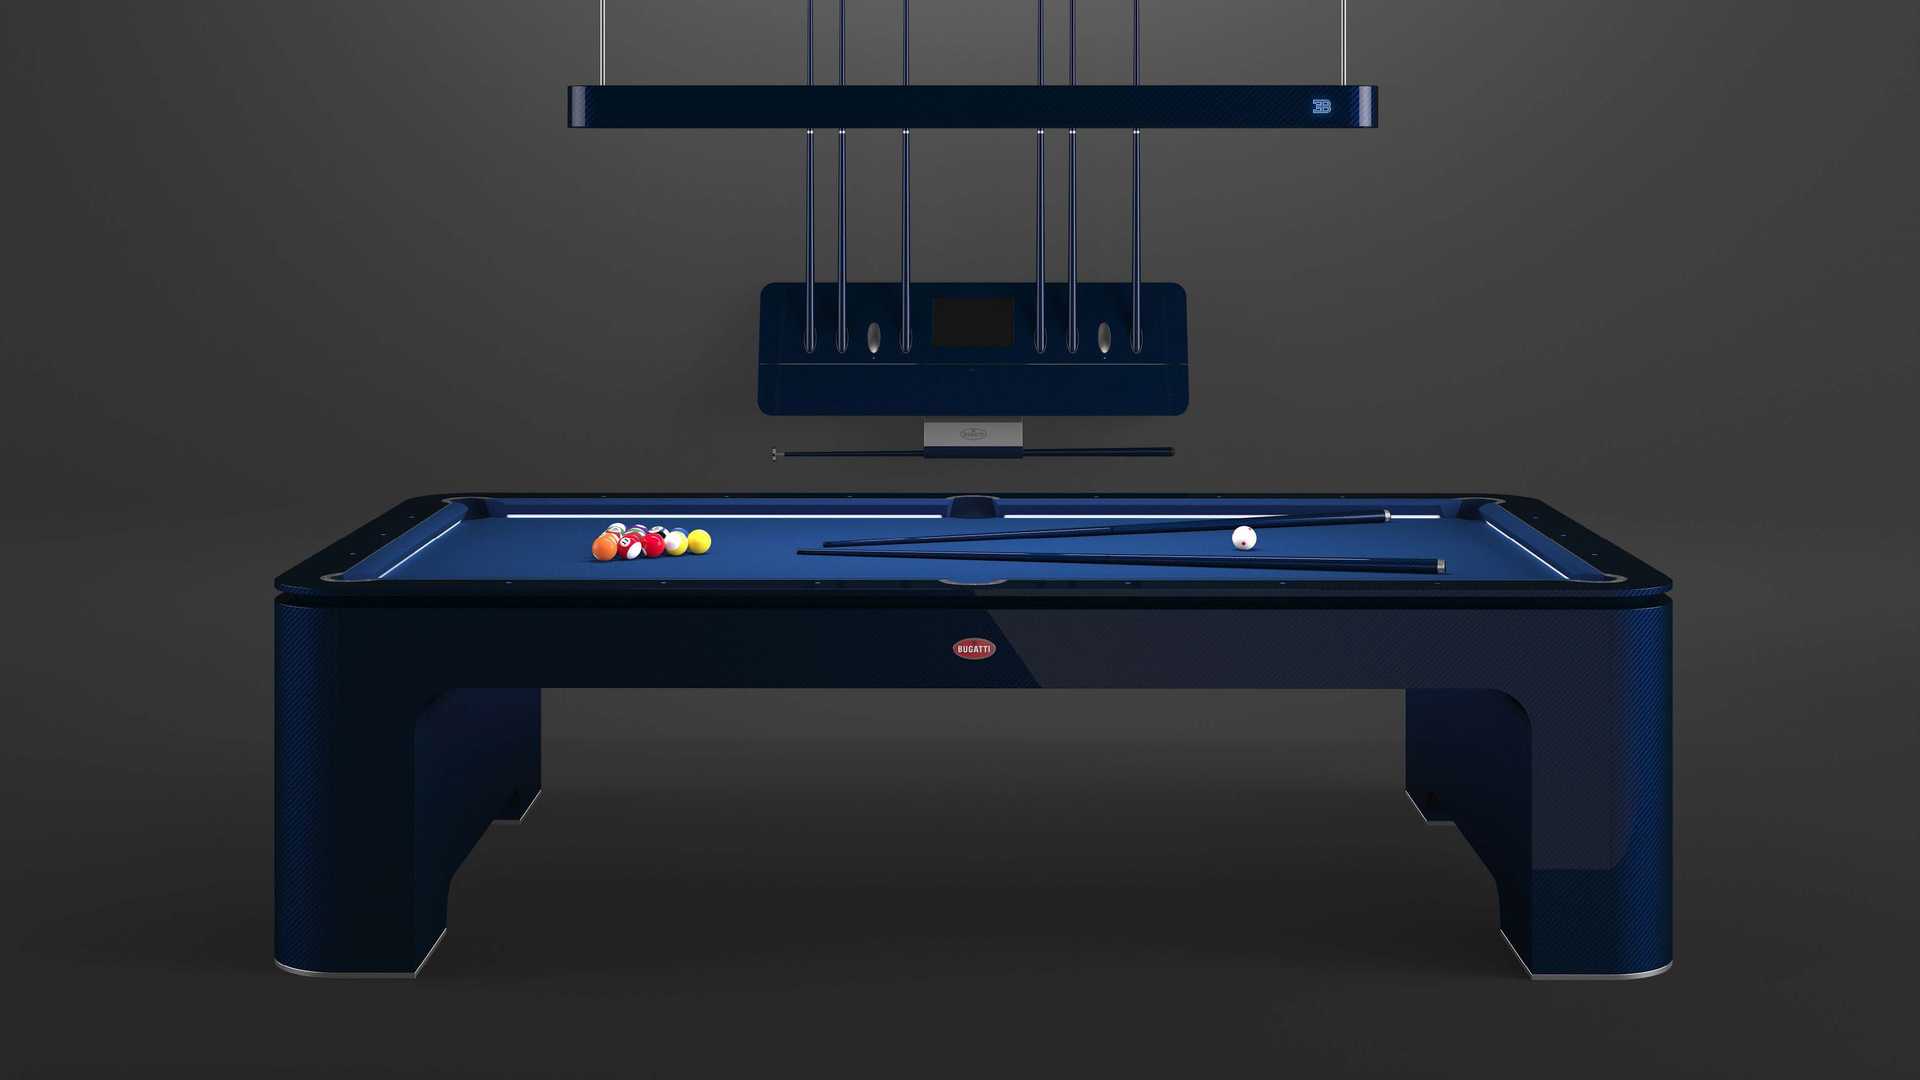 The New Bugatti Pool Table Is All High Tech And Design